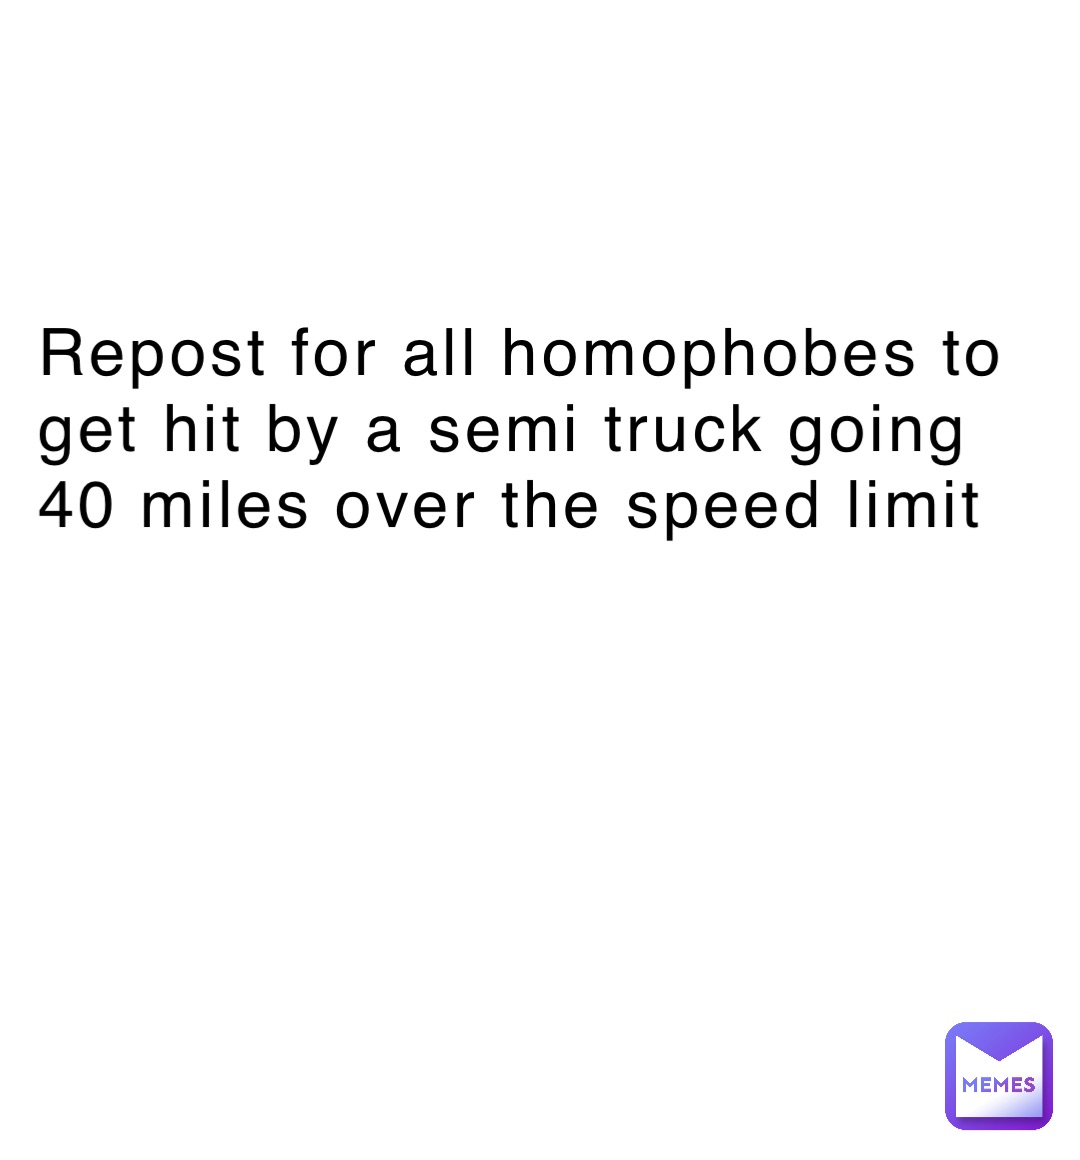 Repost for all homophobes to get hit by a semi truck going 40 miles over the speed limit